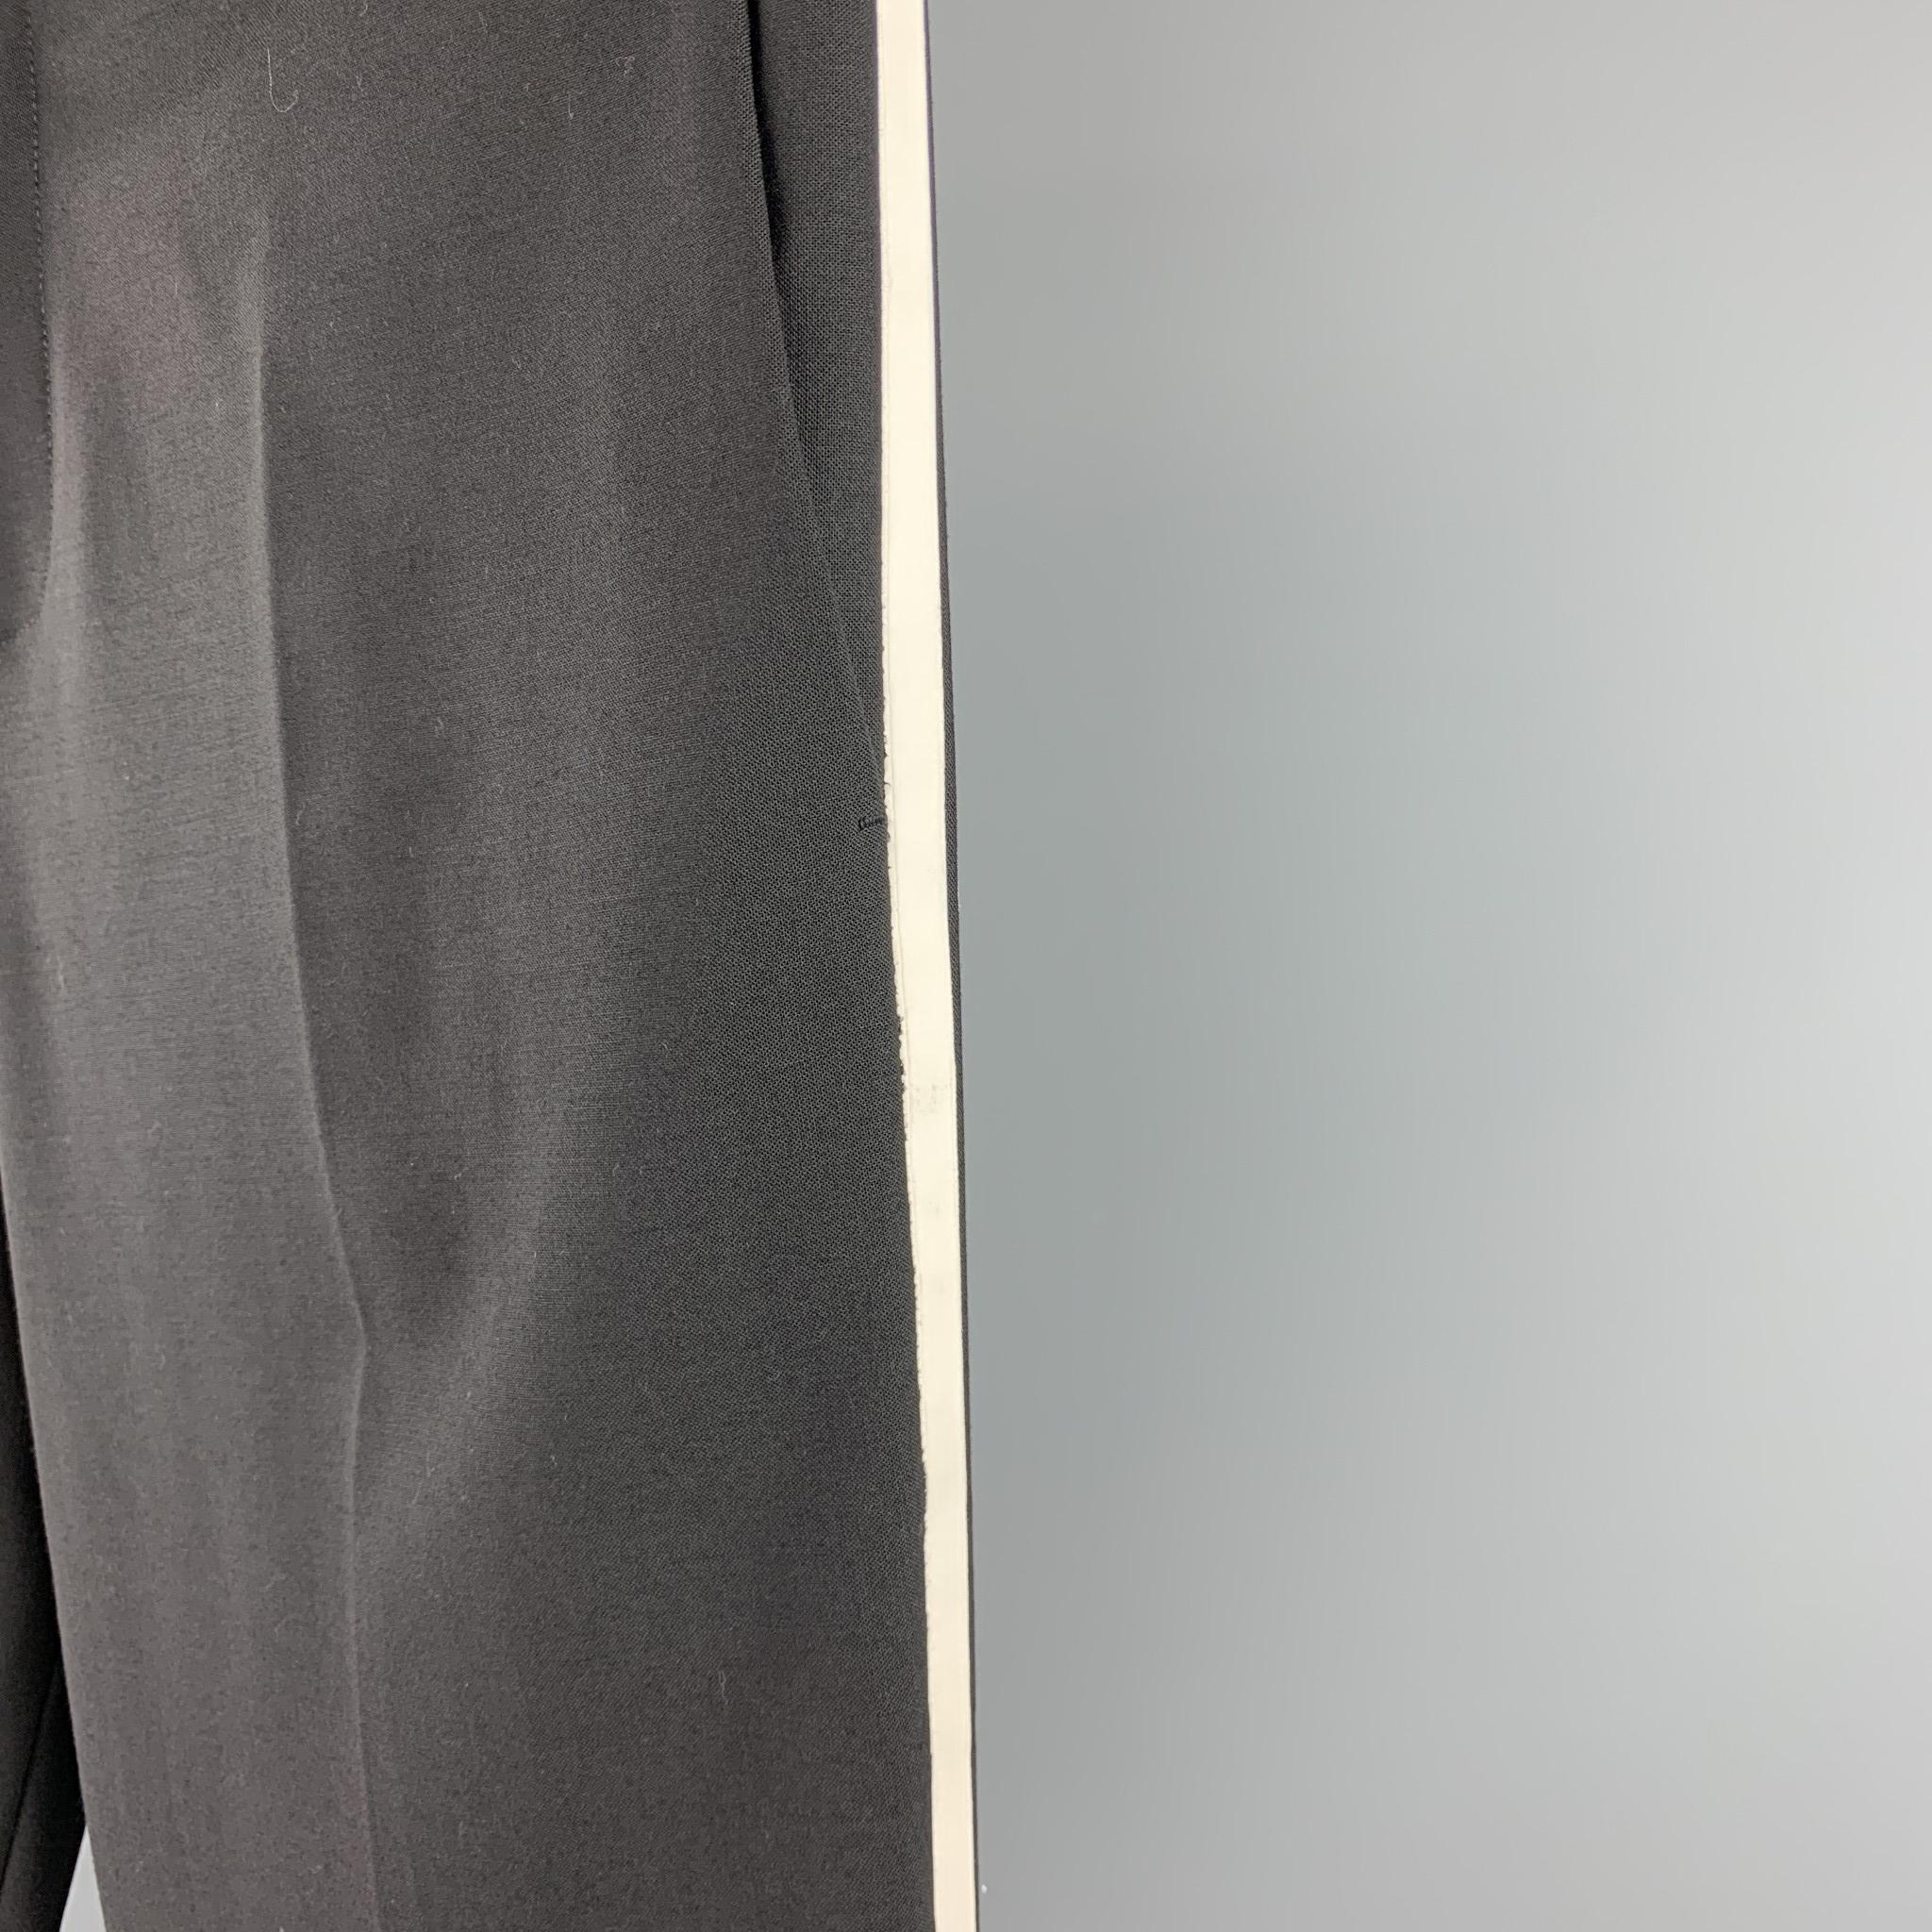 NEIL BARRETT dress pants comes in a black polyester with a white tuxedo stripe featuring a slim fit, regular rise, and a zip fly closure. As-Is. Made in Italy.

Very Good Pre-Owned Condition.
Marked: IT 52

Measurements:

Waist: 38 in. 
Rise: 11 in.